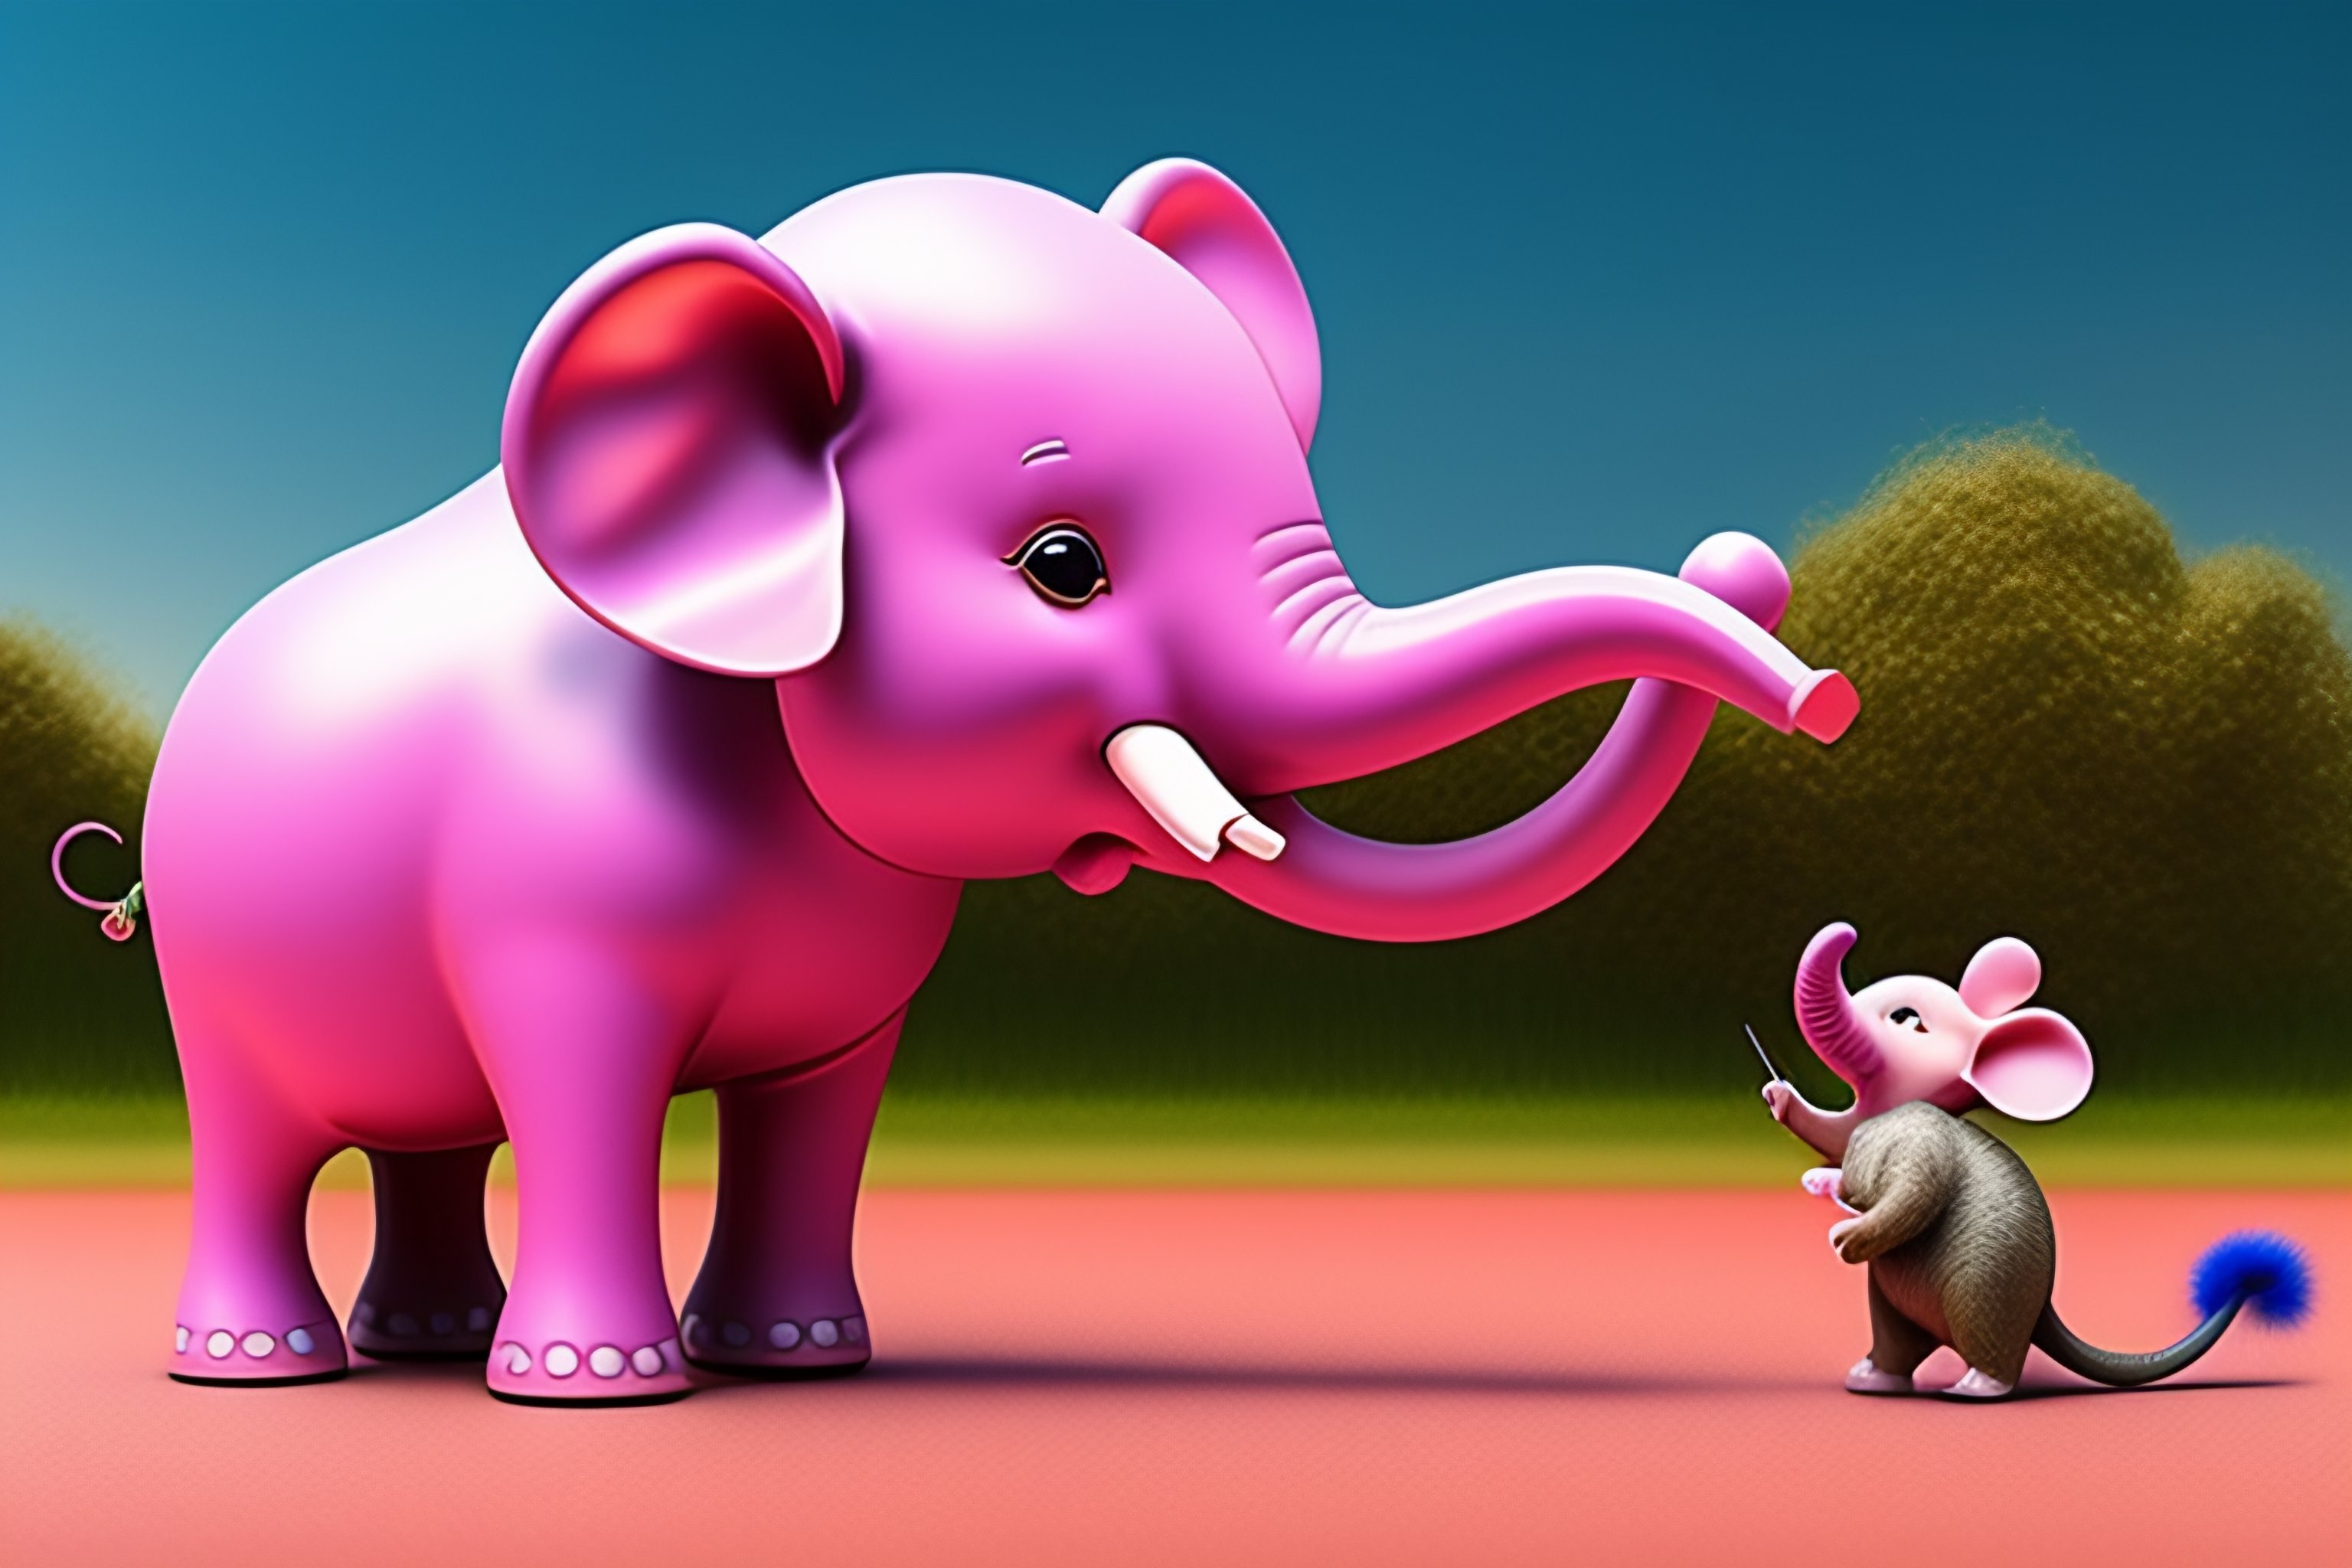 Lexica - A pink elephant dancing with a mouse